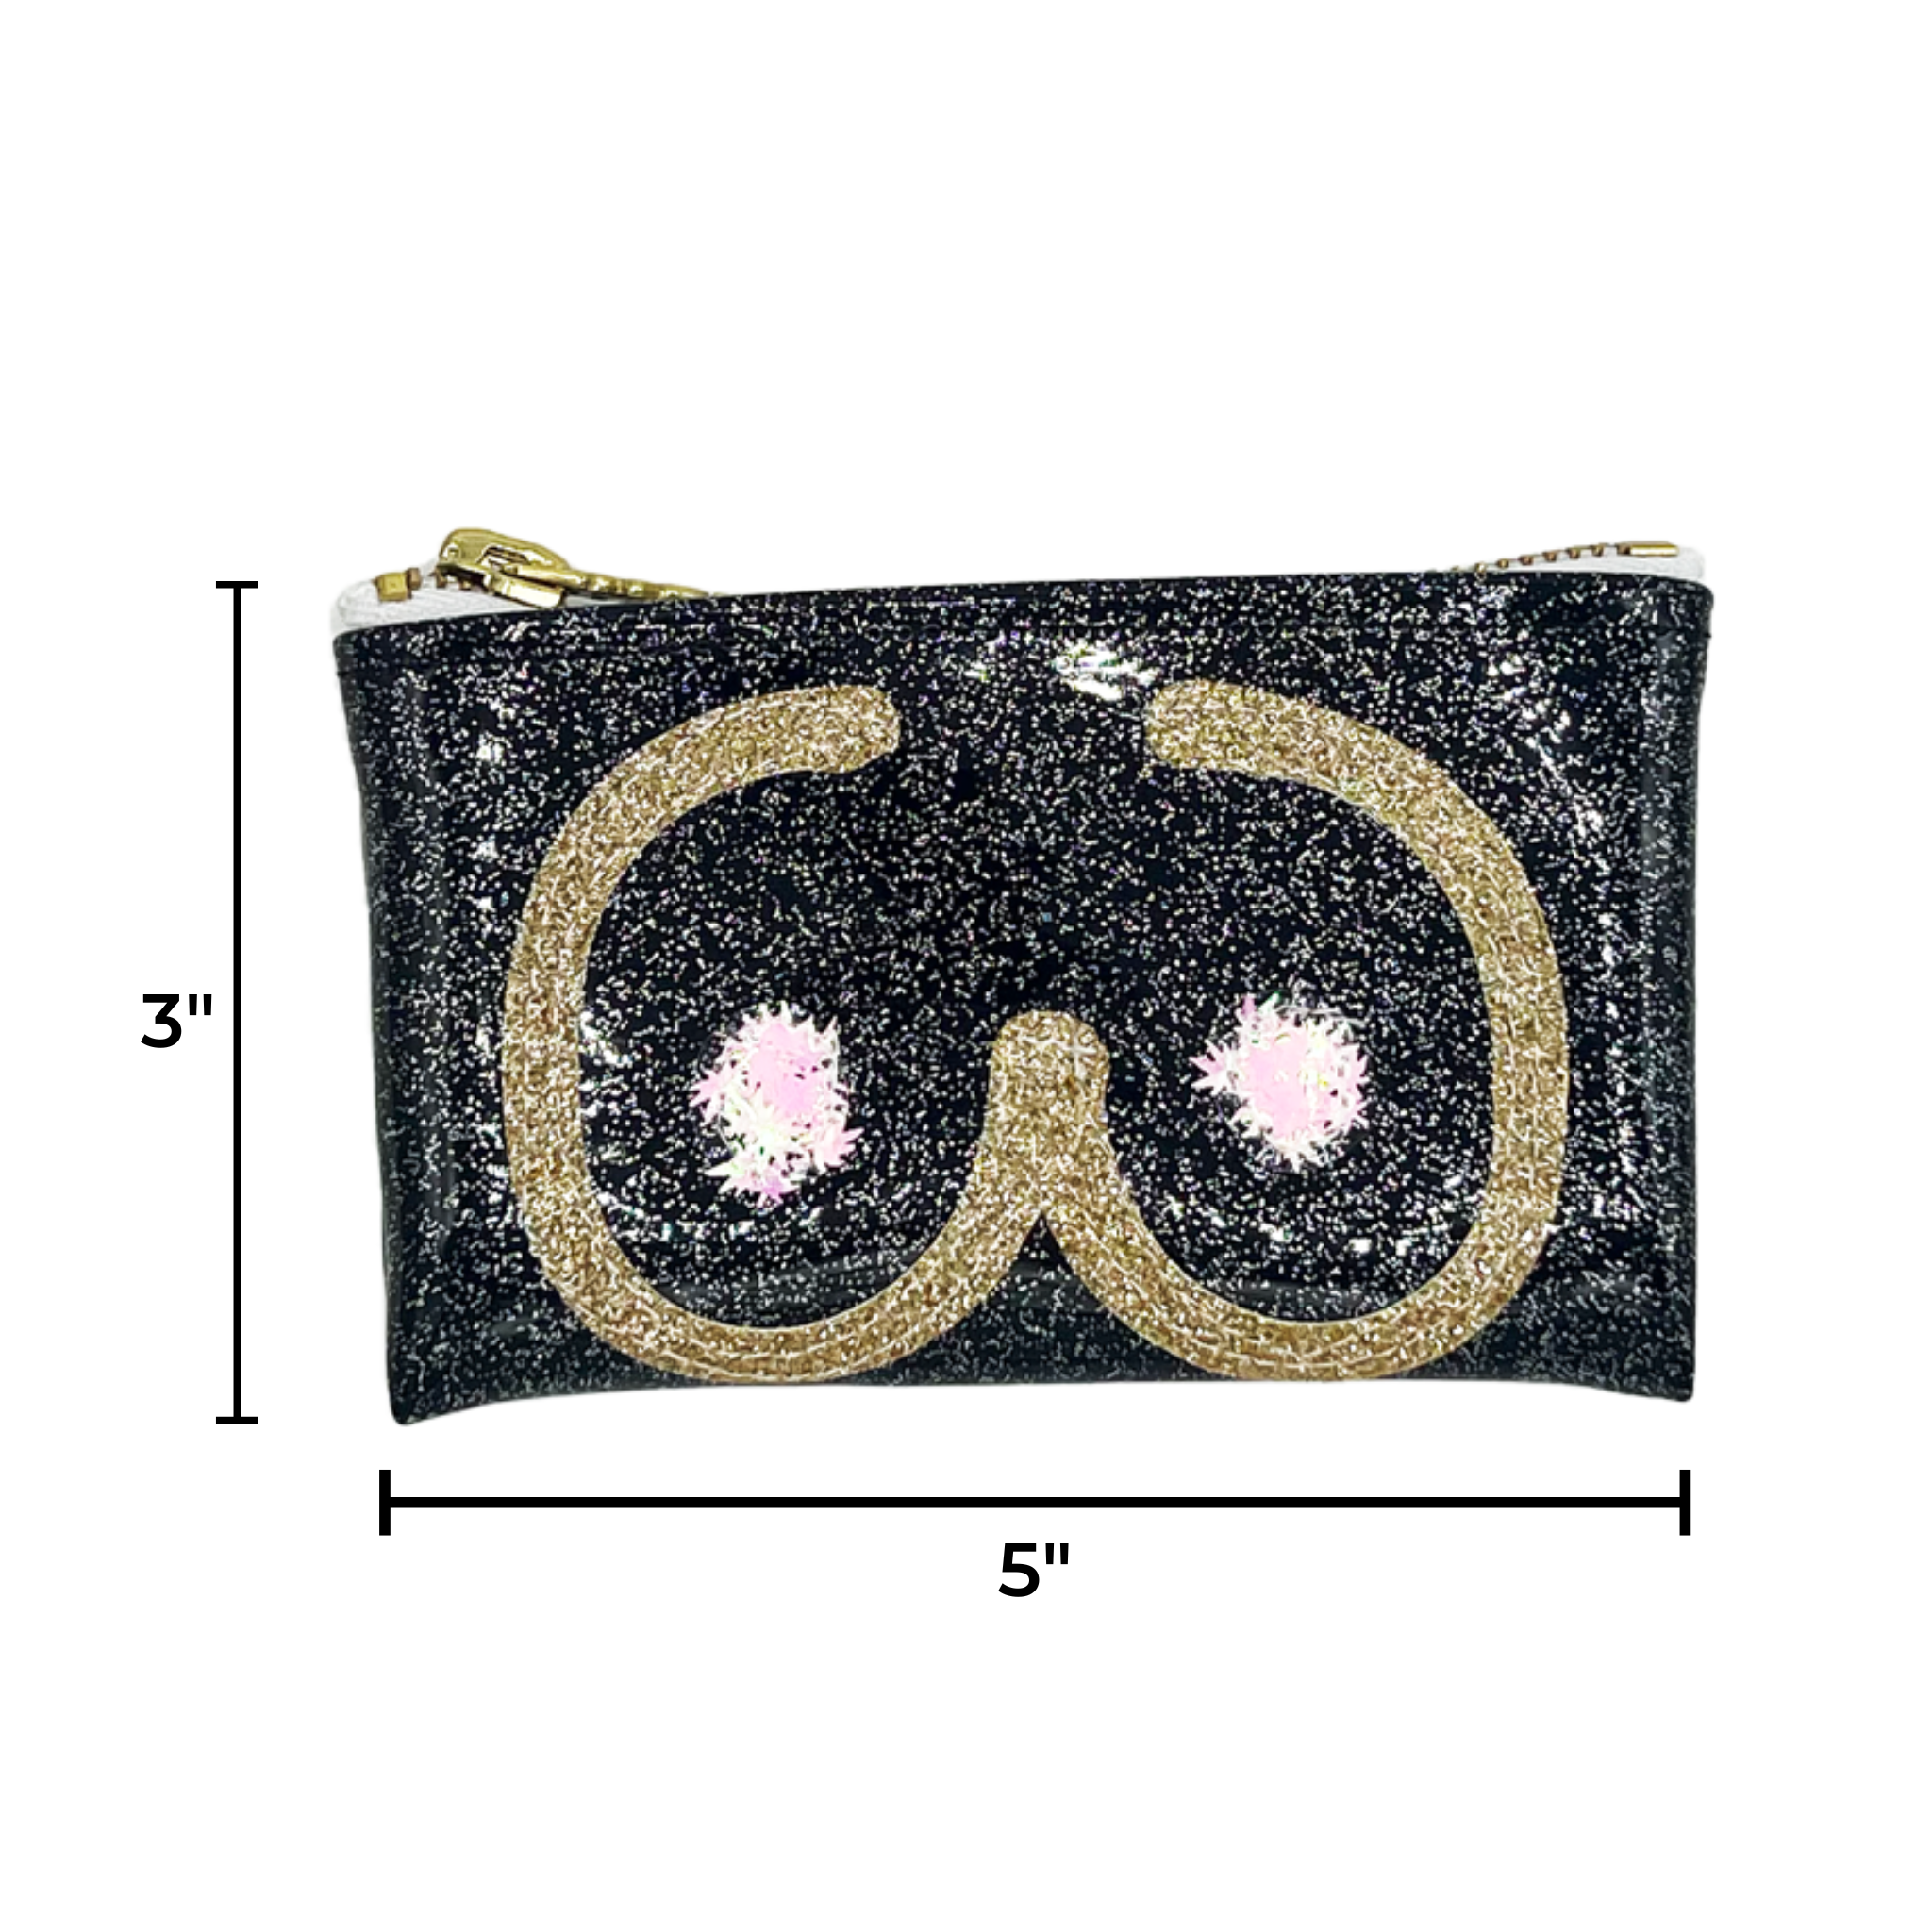  Black and gold glitter clutch with pink leaf details and dimensions marked as 5 inches by 3 inches.